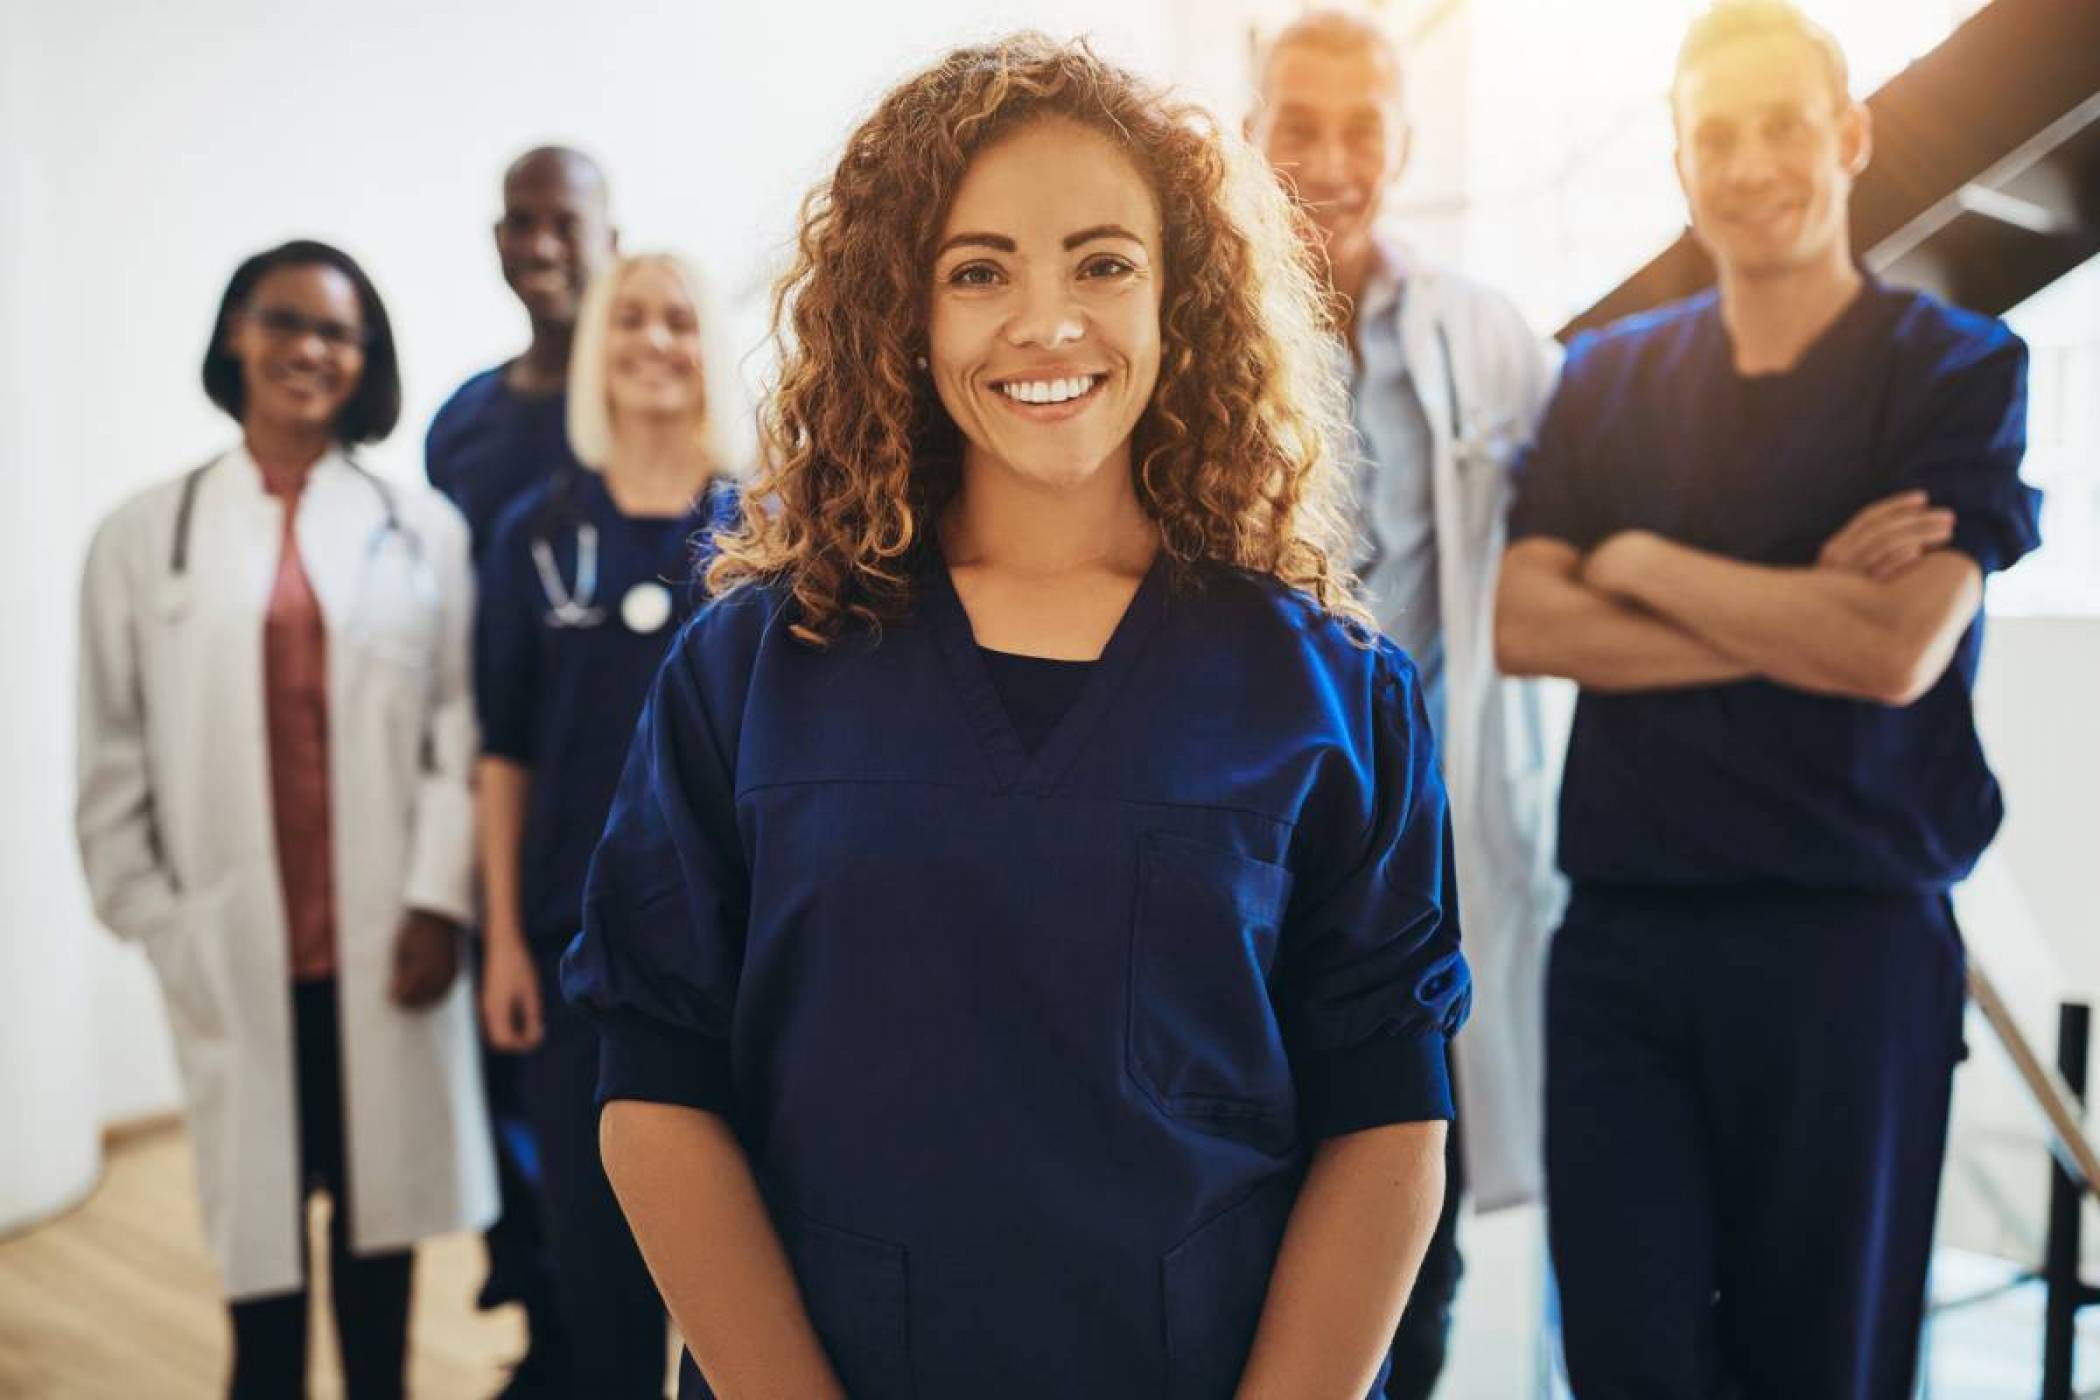 A standing female nurse is looking directly at us with a warm smile. She is surrounded in the back by a medical team of male and female doctors and nurses.